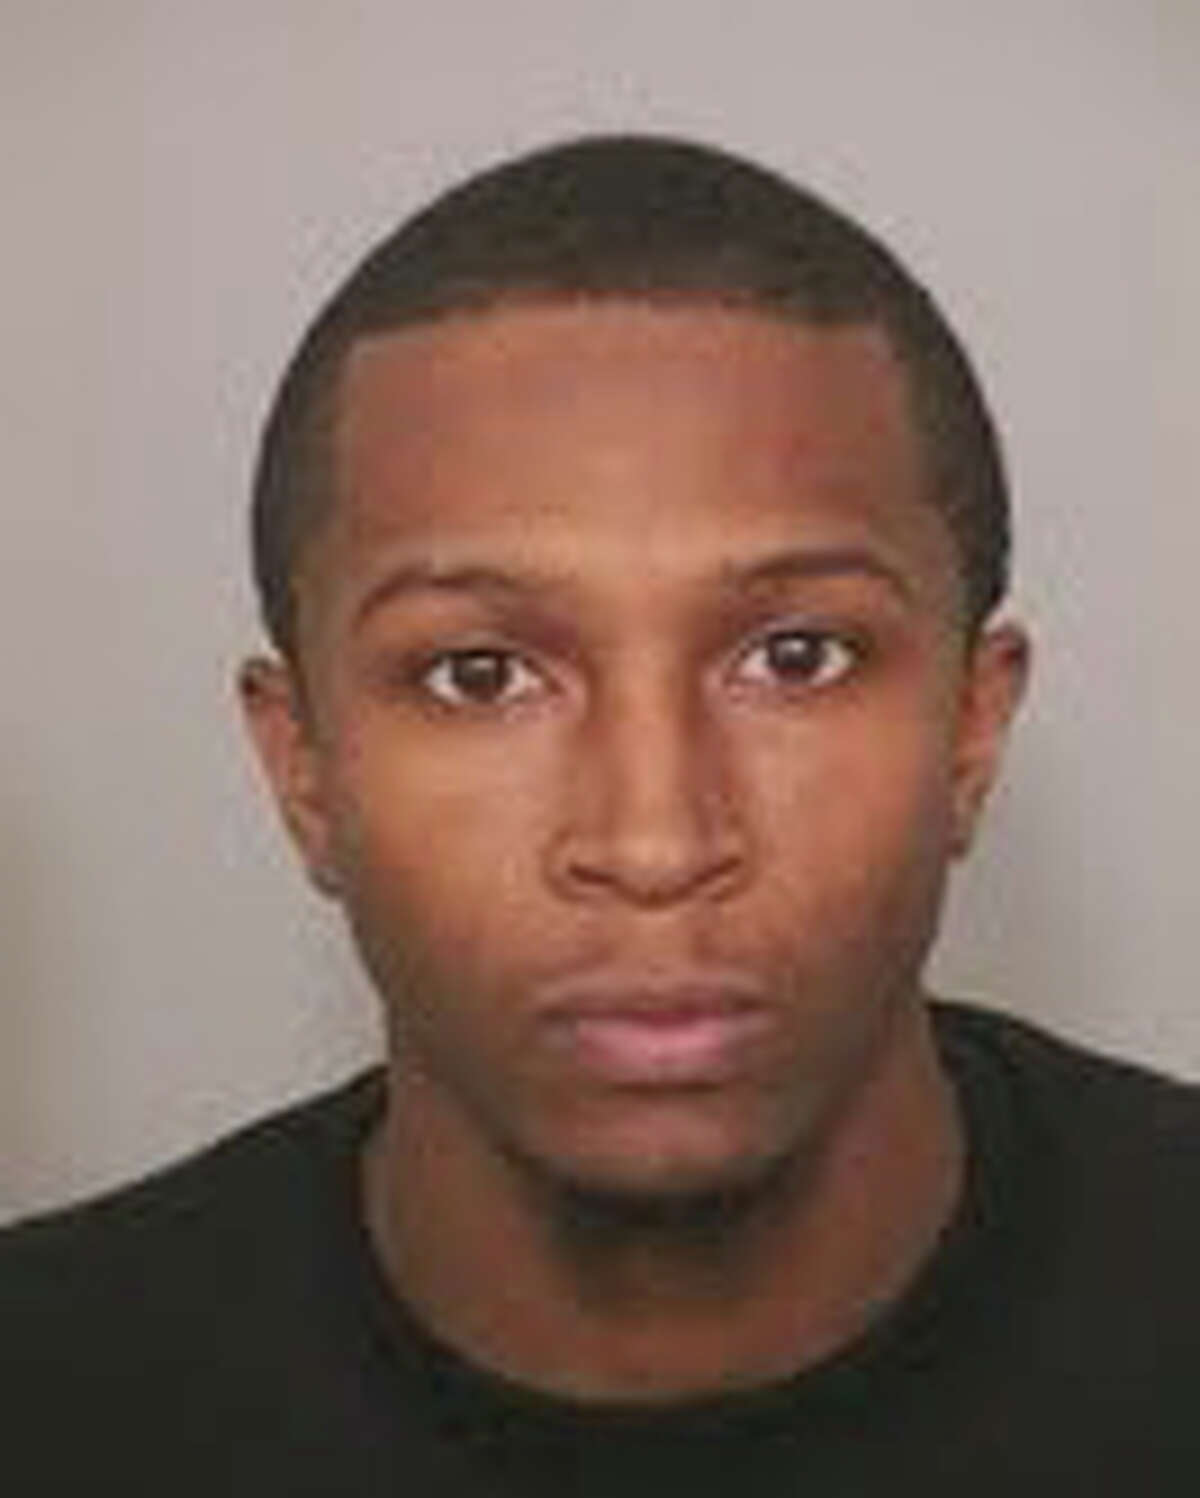 Danbury police arrested Eugene Robinson, 22, on Friday, Jan. 27, 2012 in connection with the November hit-and-run death of WestConn student Dong Lin.